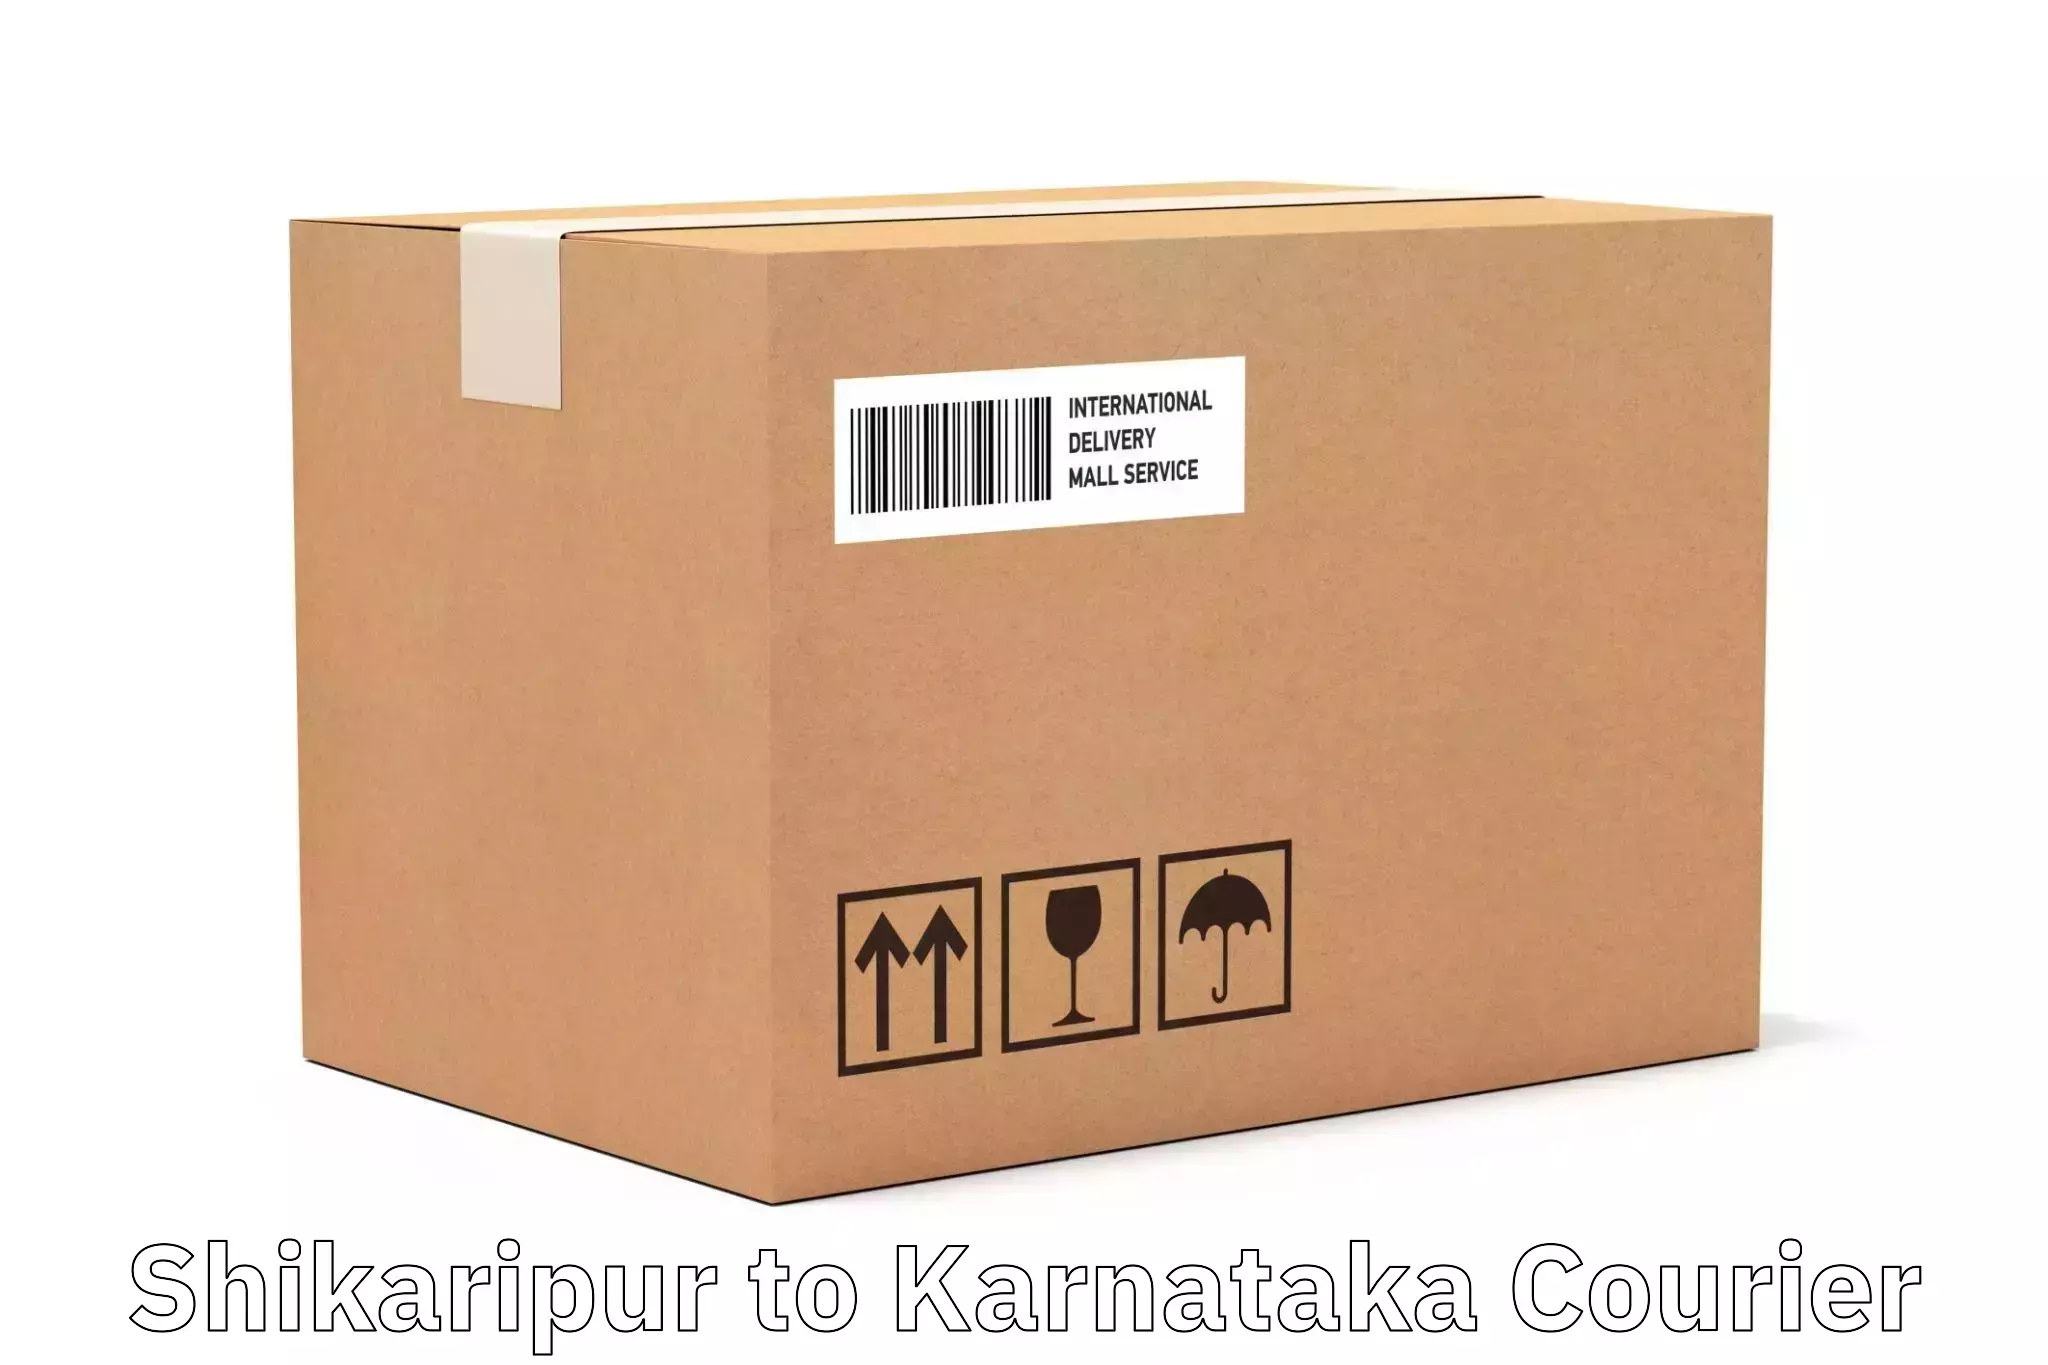 High-quality delivery services Shikaripur to Shorapur